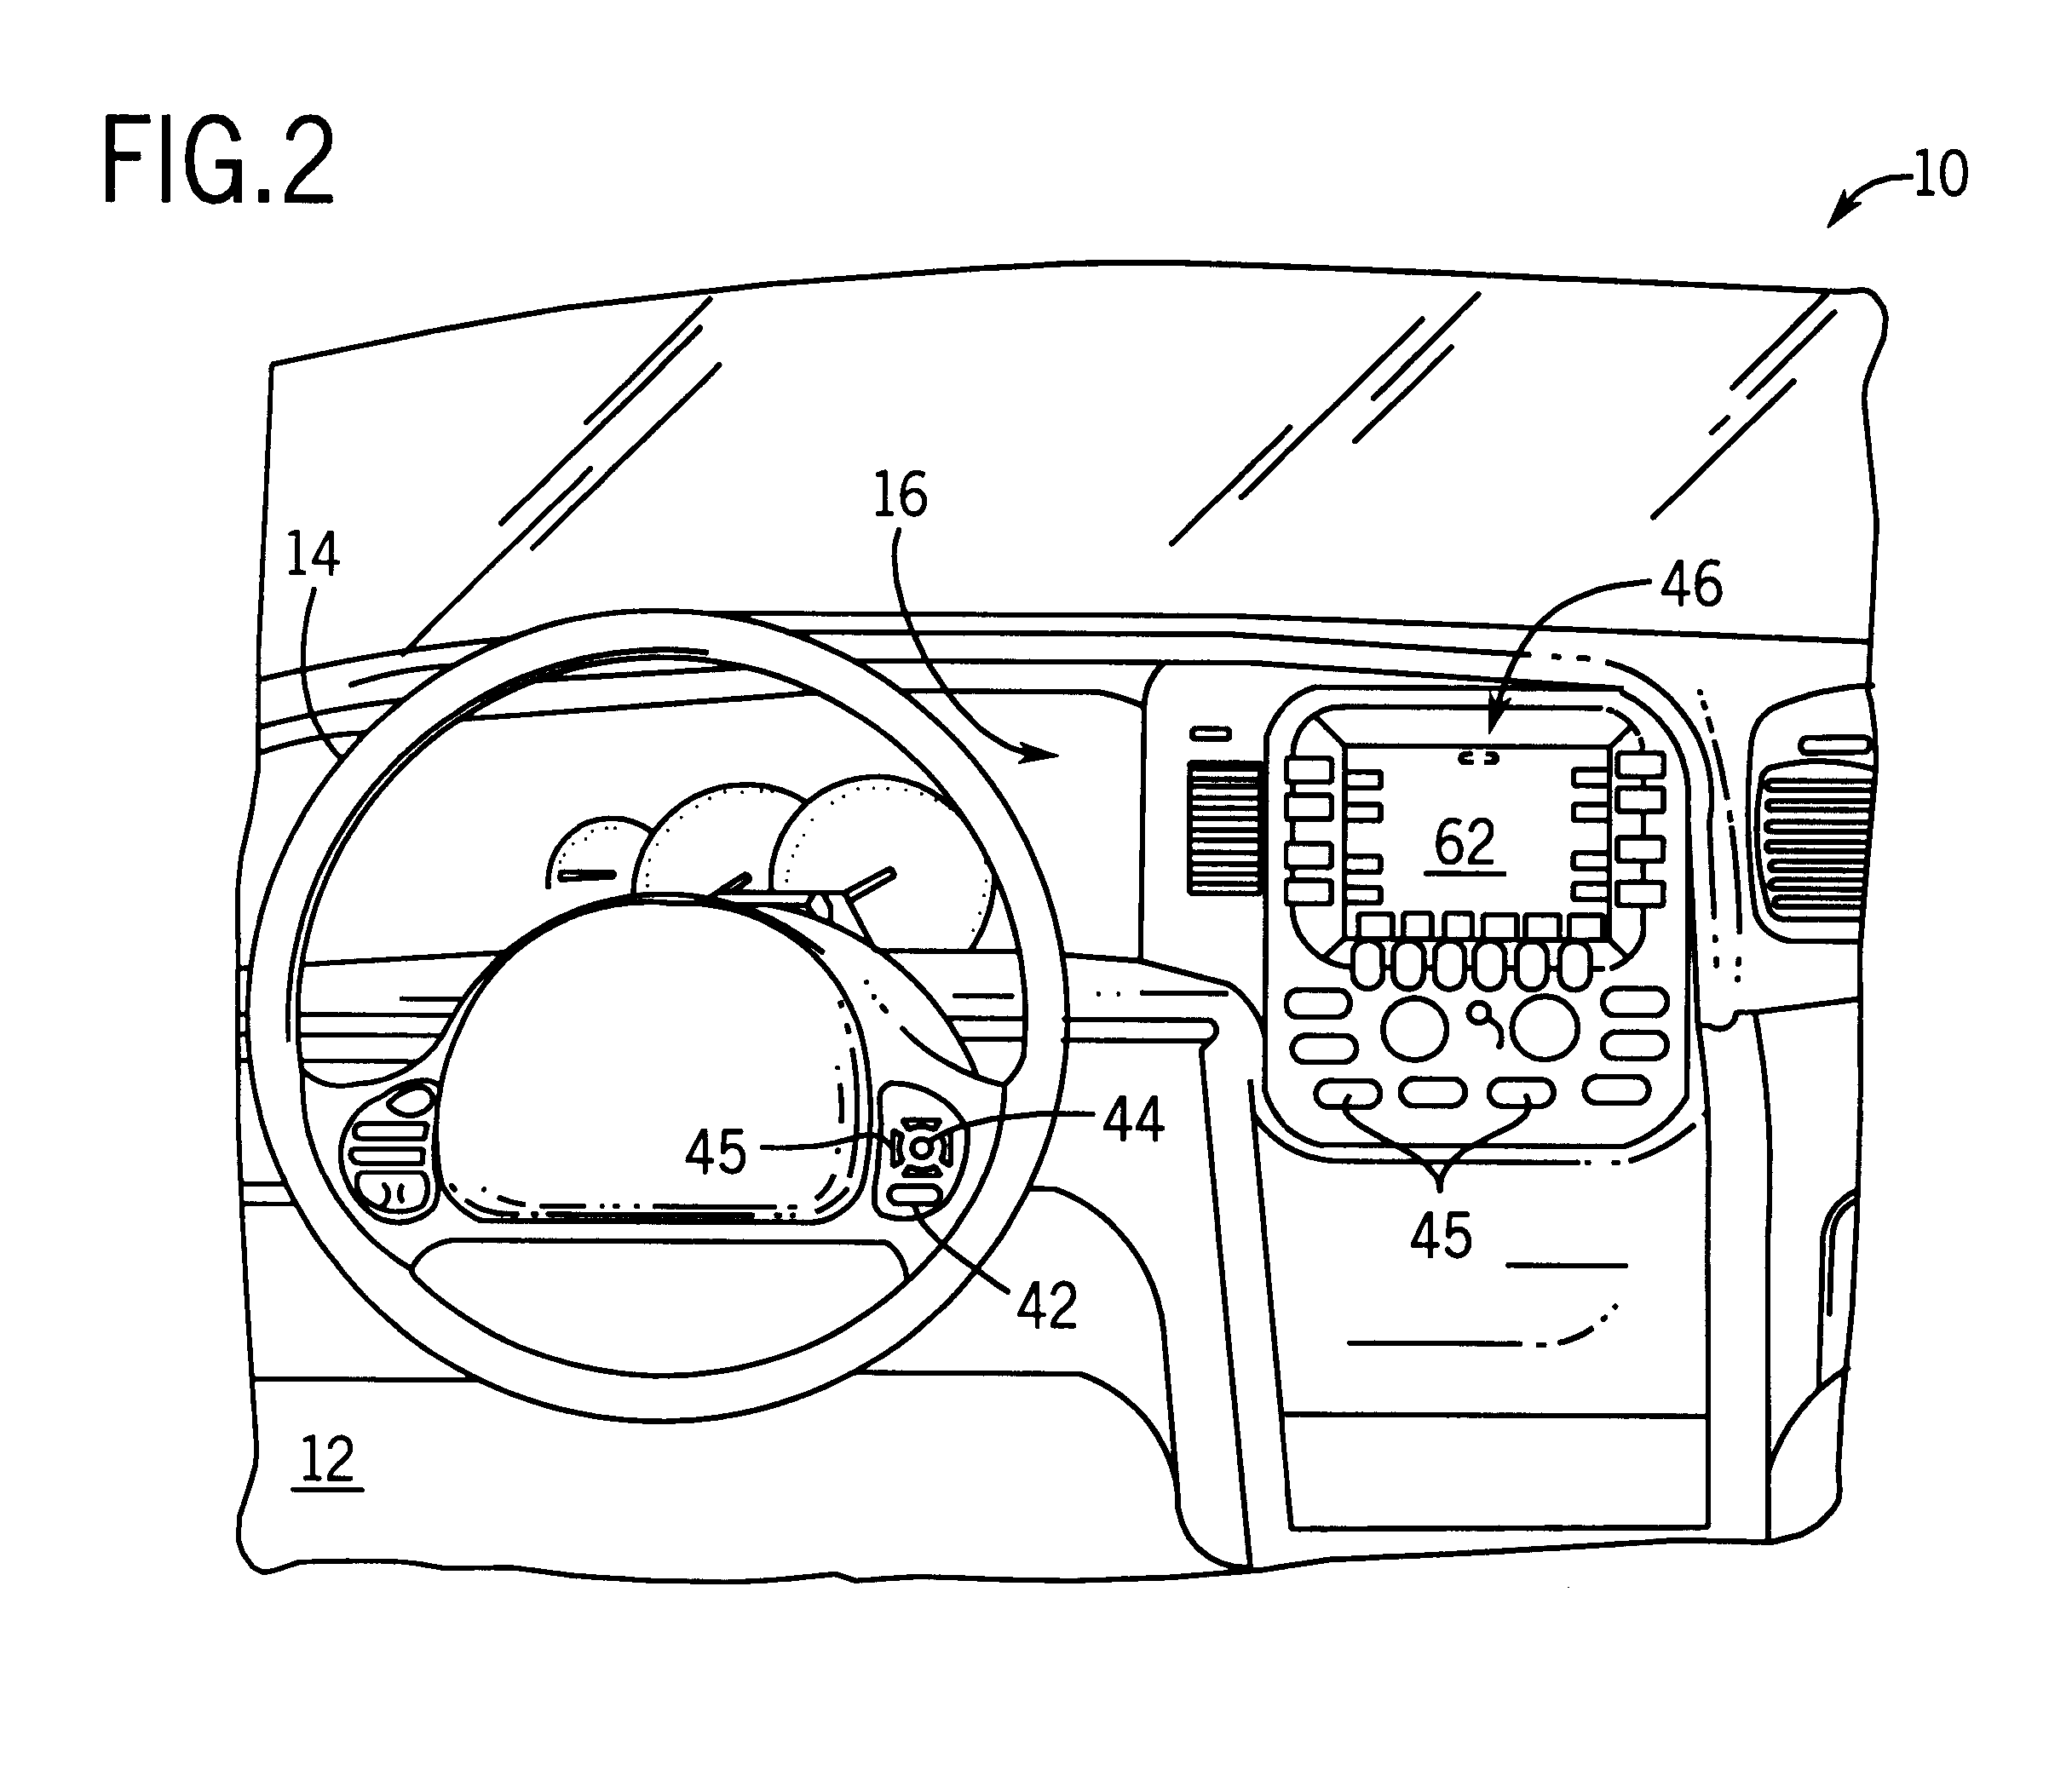 Method and apparatus for controlling multiple speech engines in an in-vehicle speech recognition system